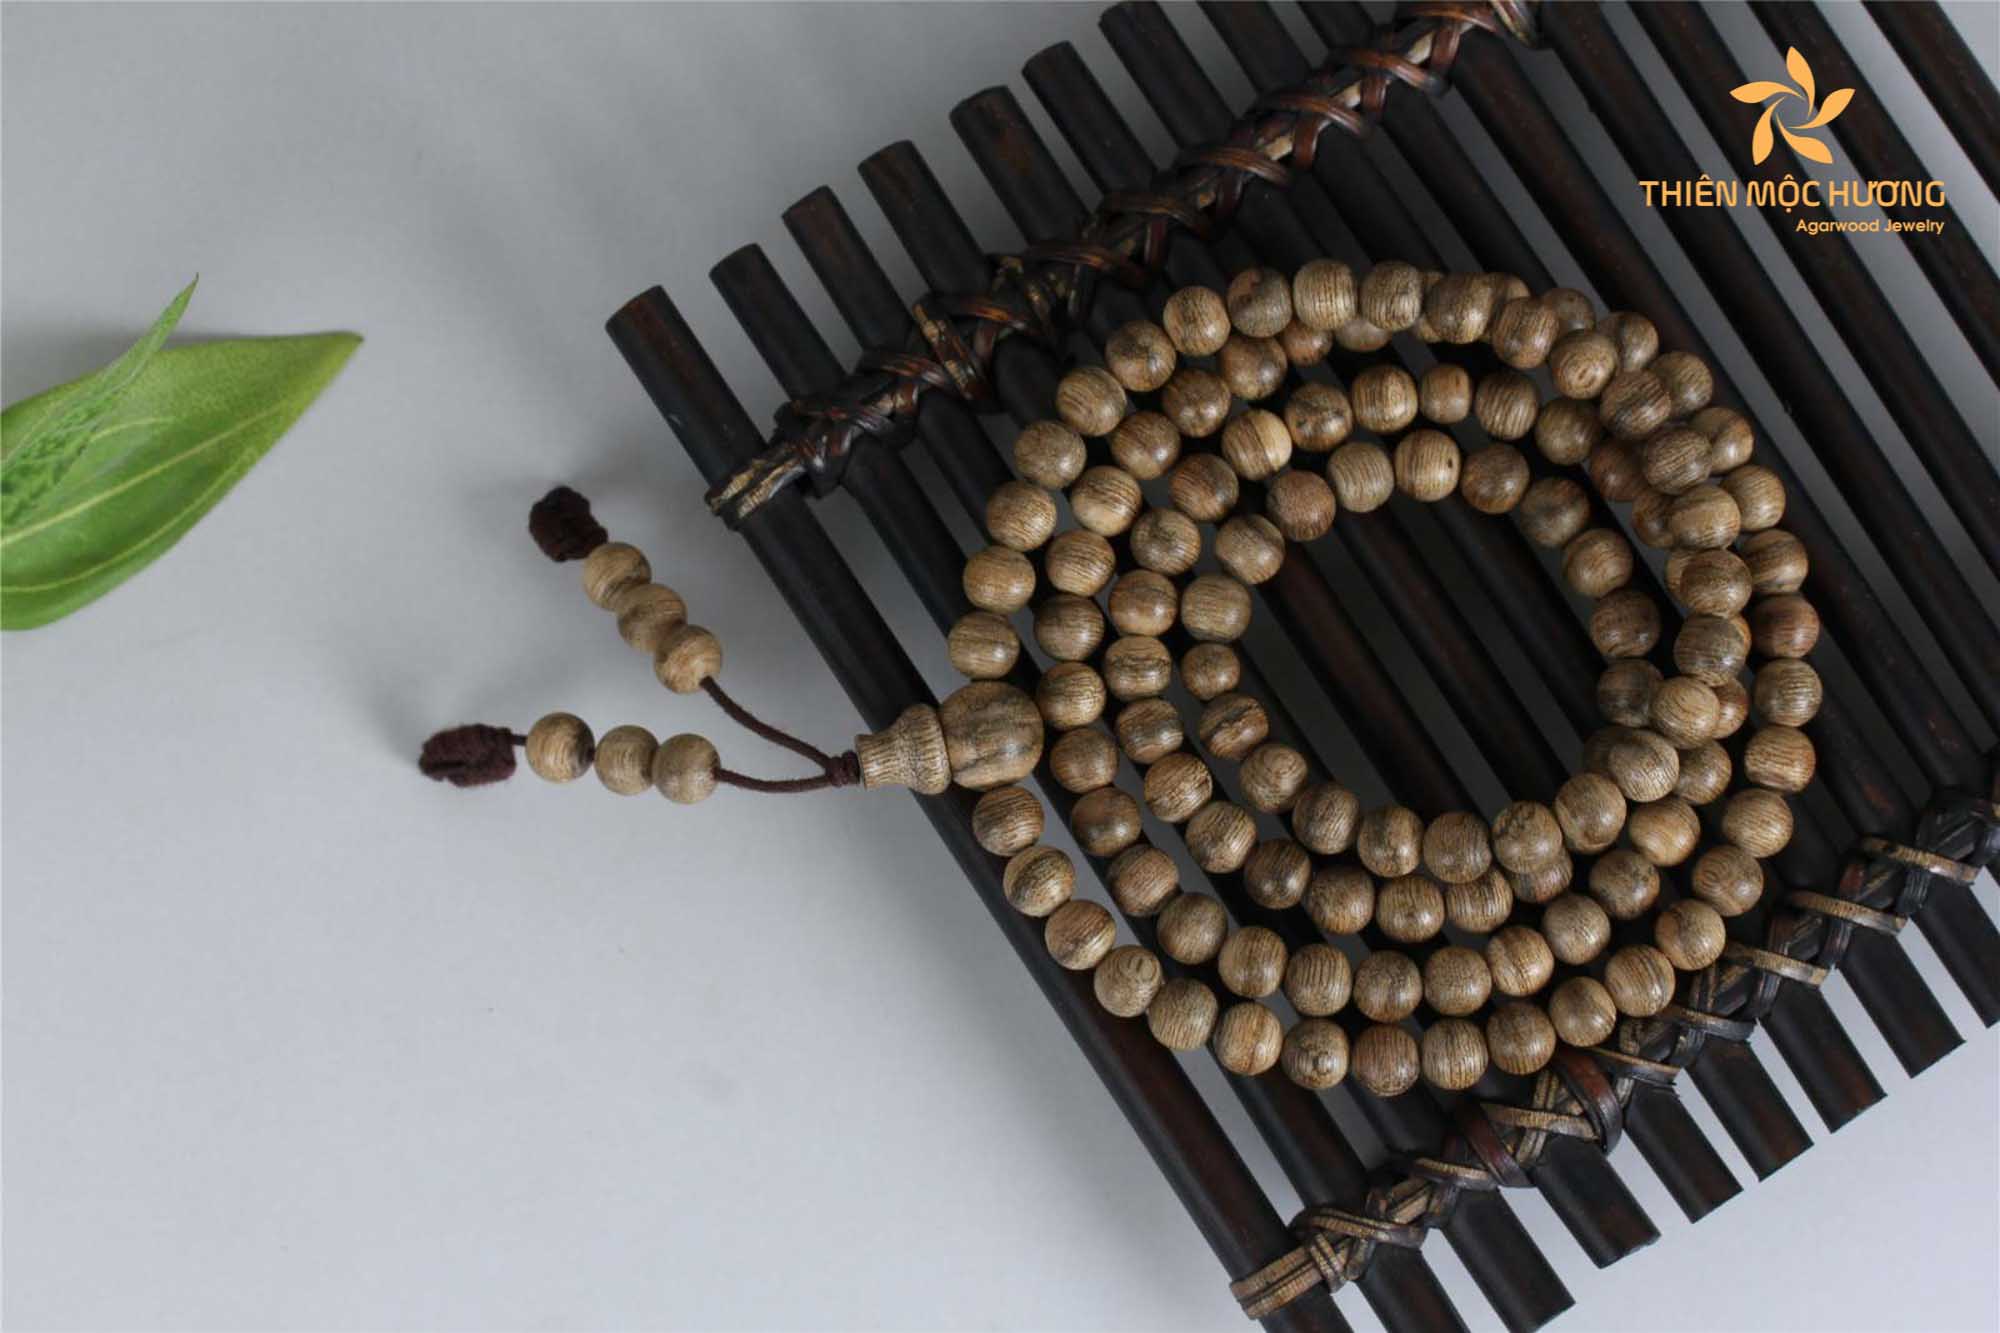 What is a mala bead necklace?